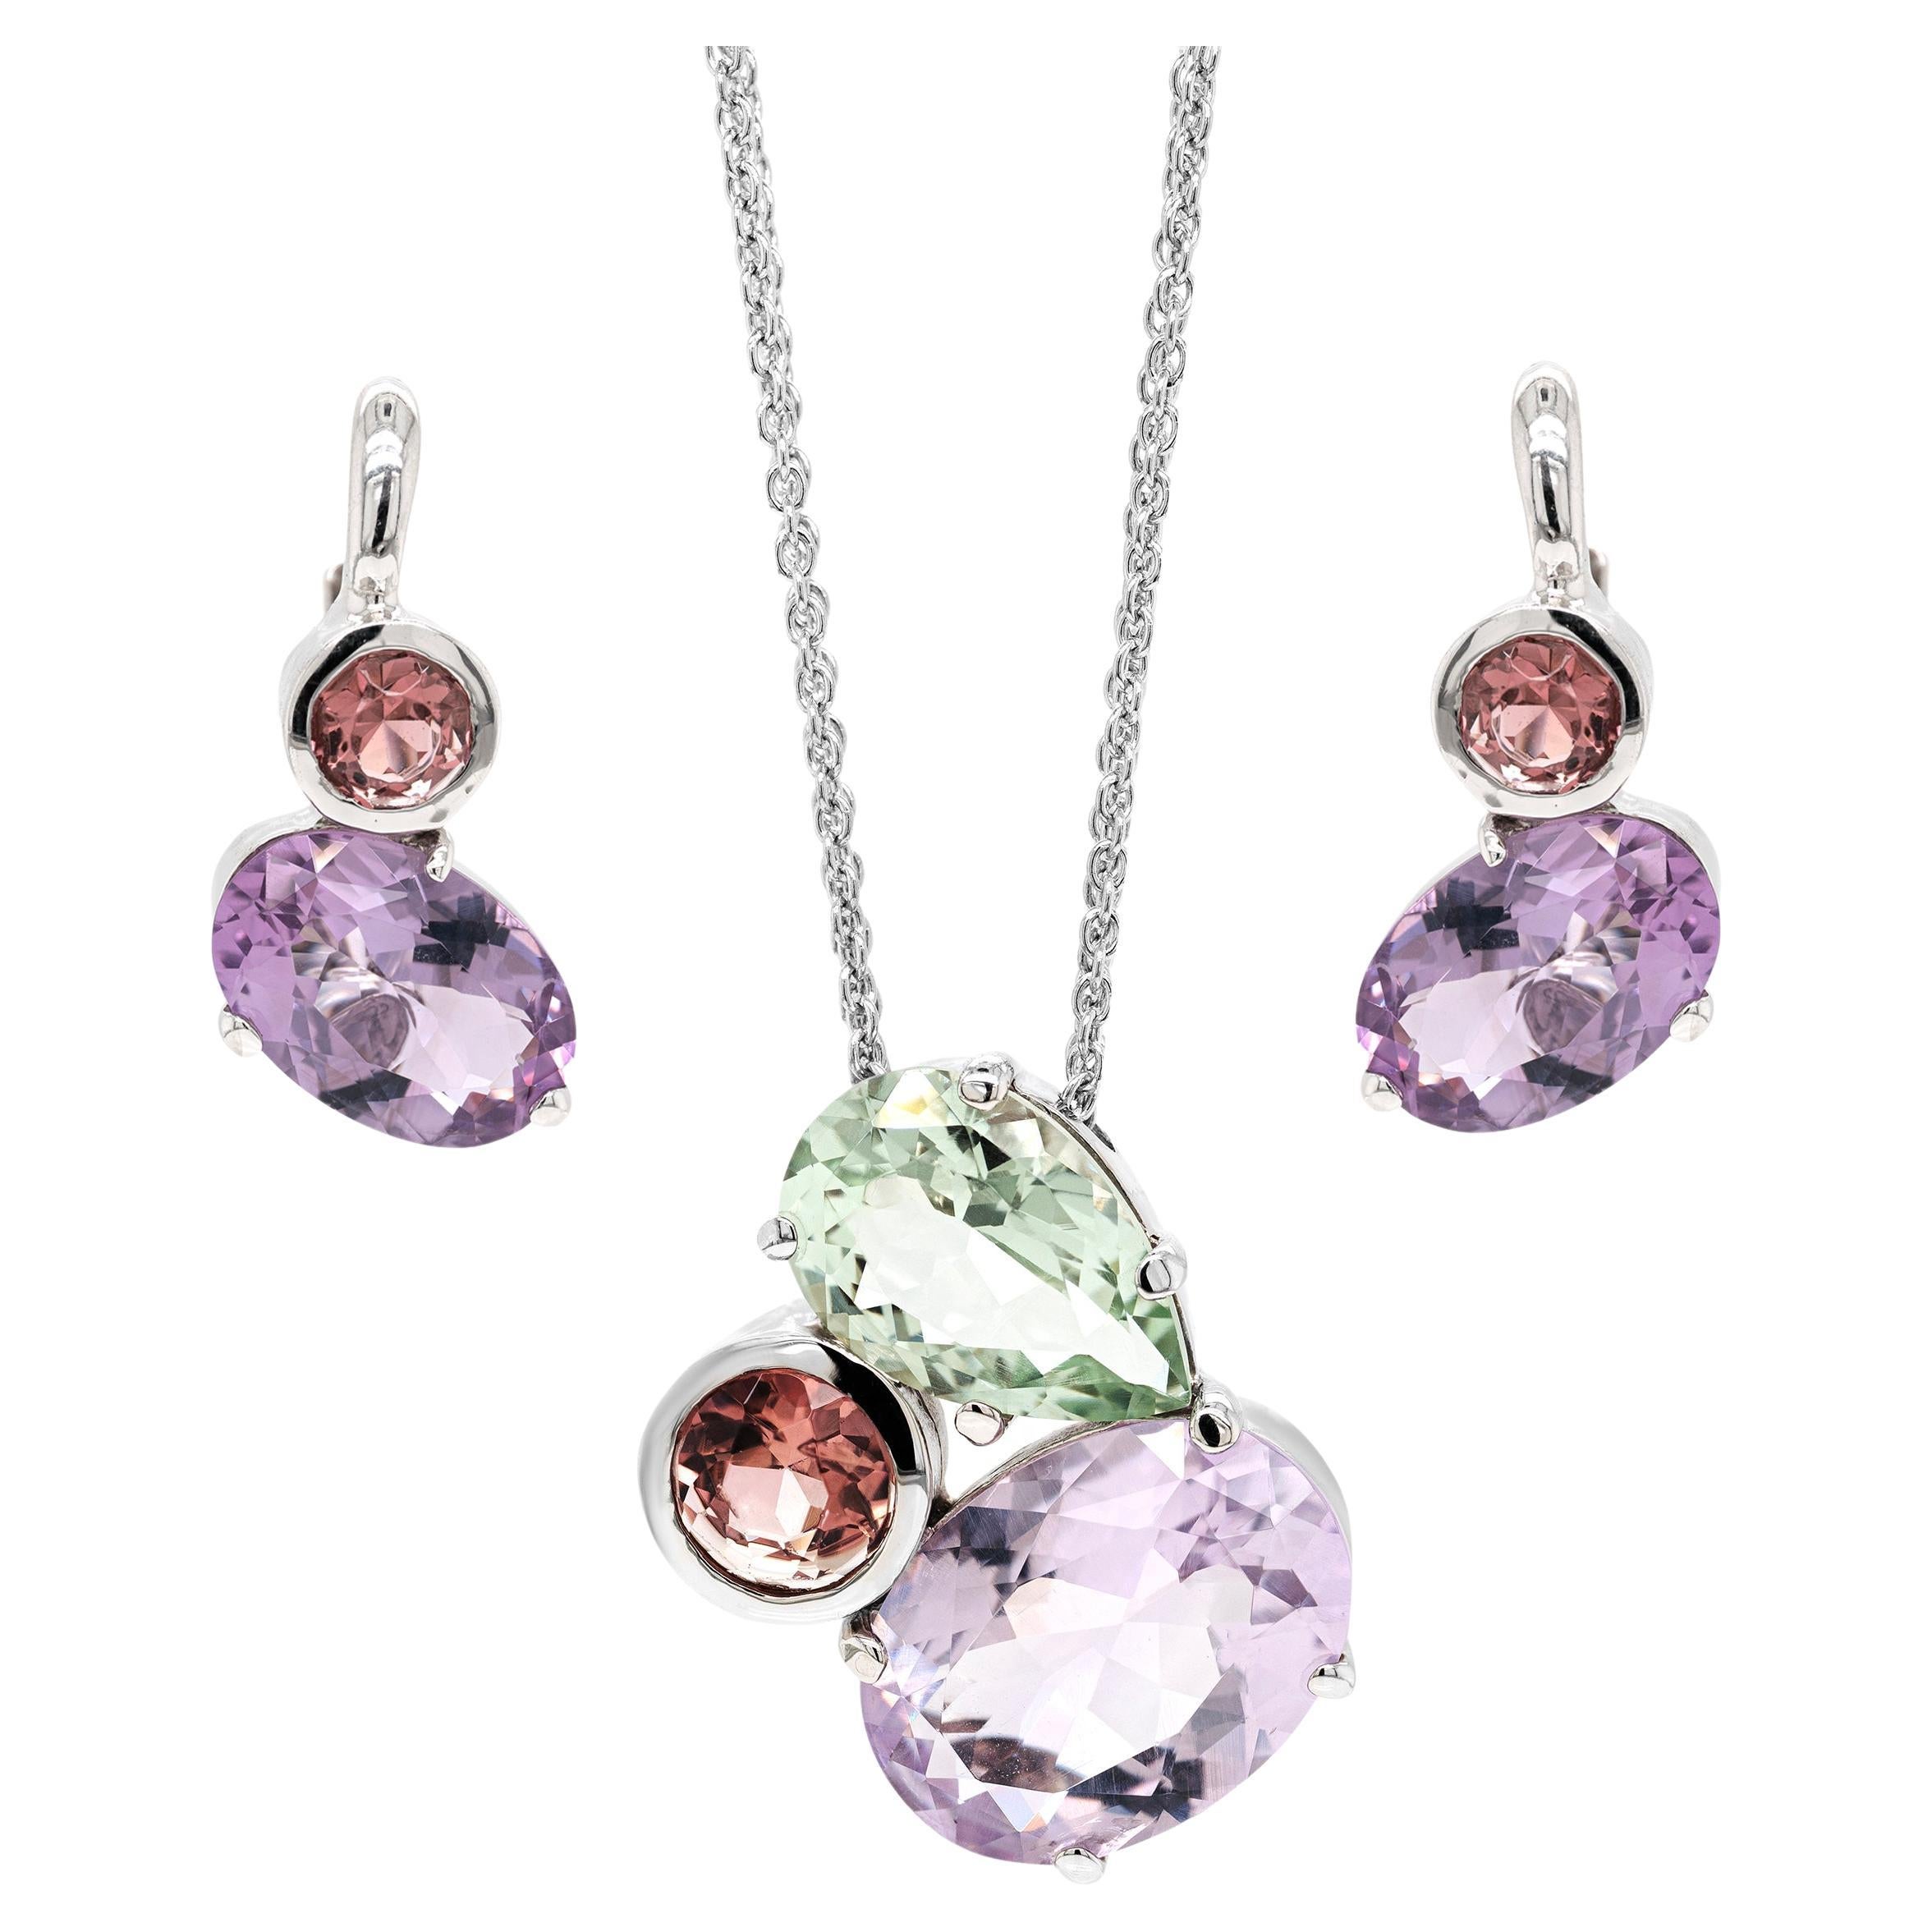 Amethyst and Tourmaline 18 Carat White Gold Earrings and Pendant Necklace Set For Sale